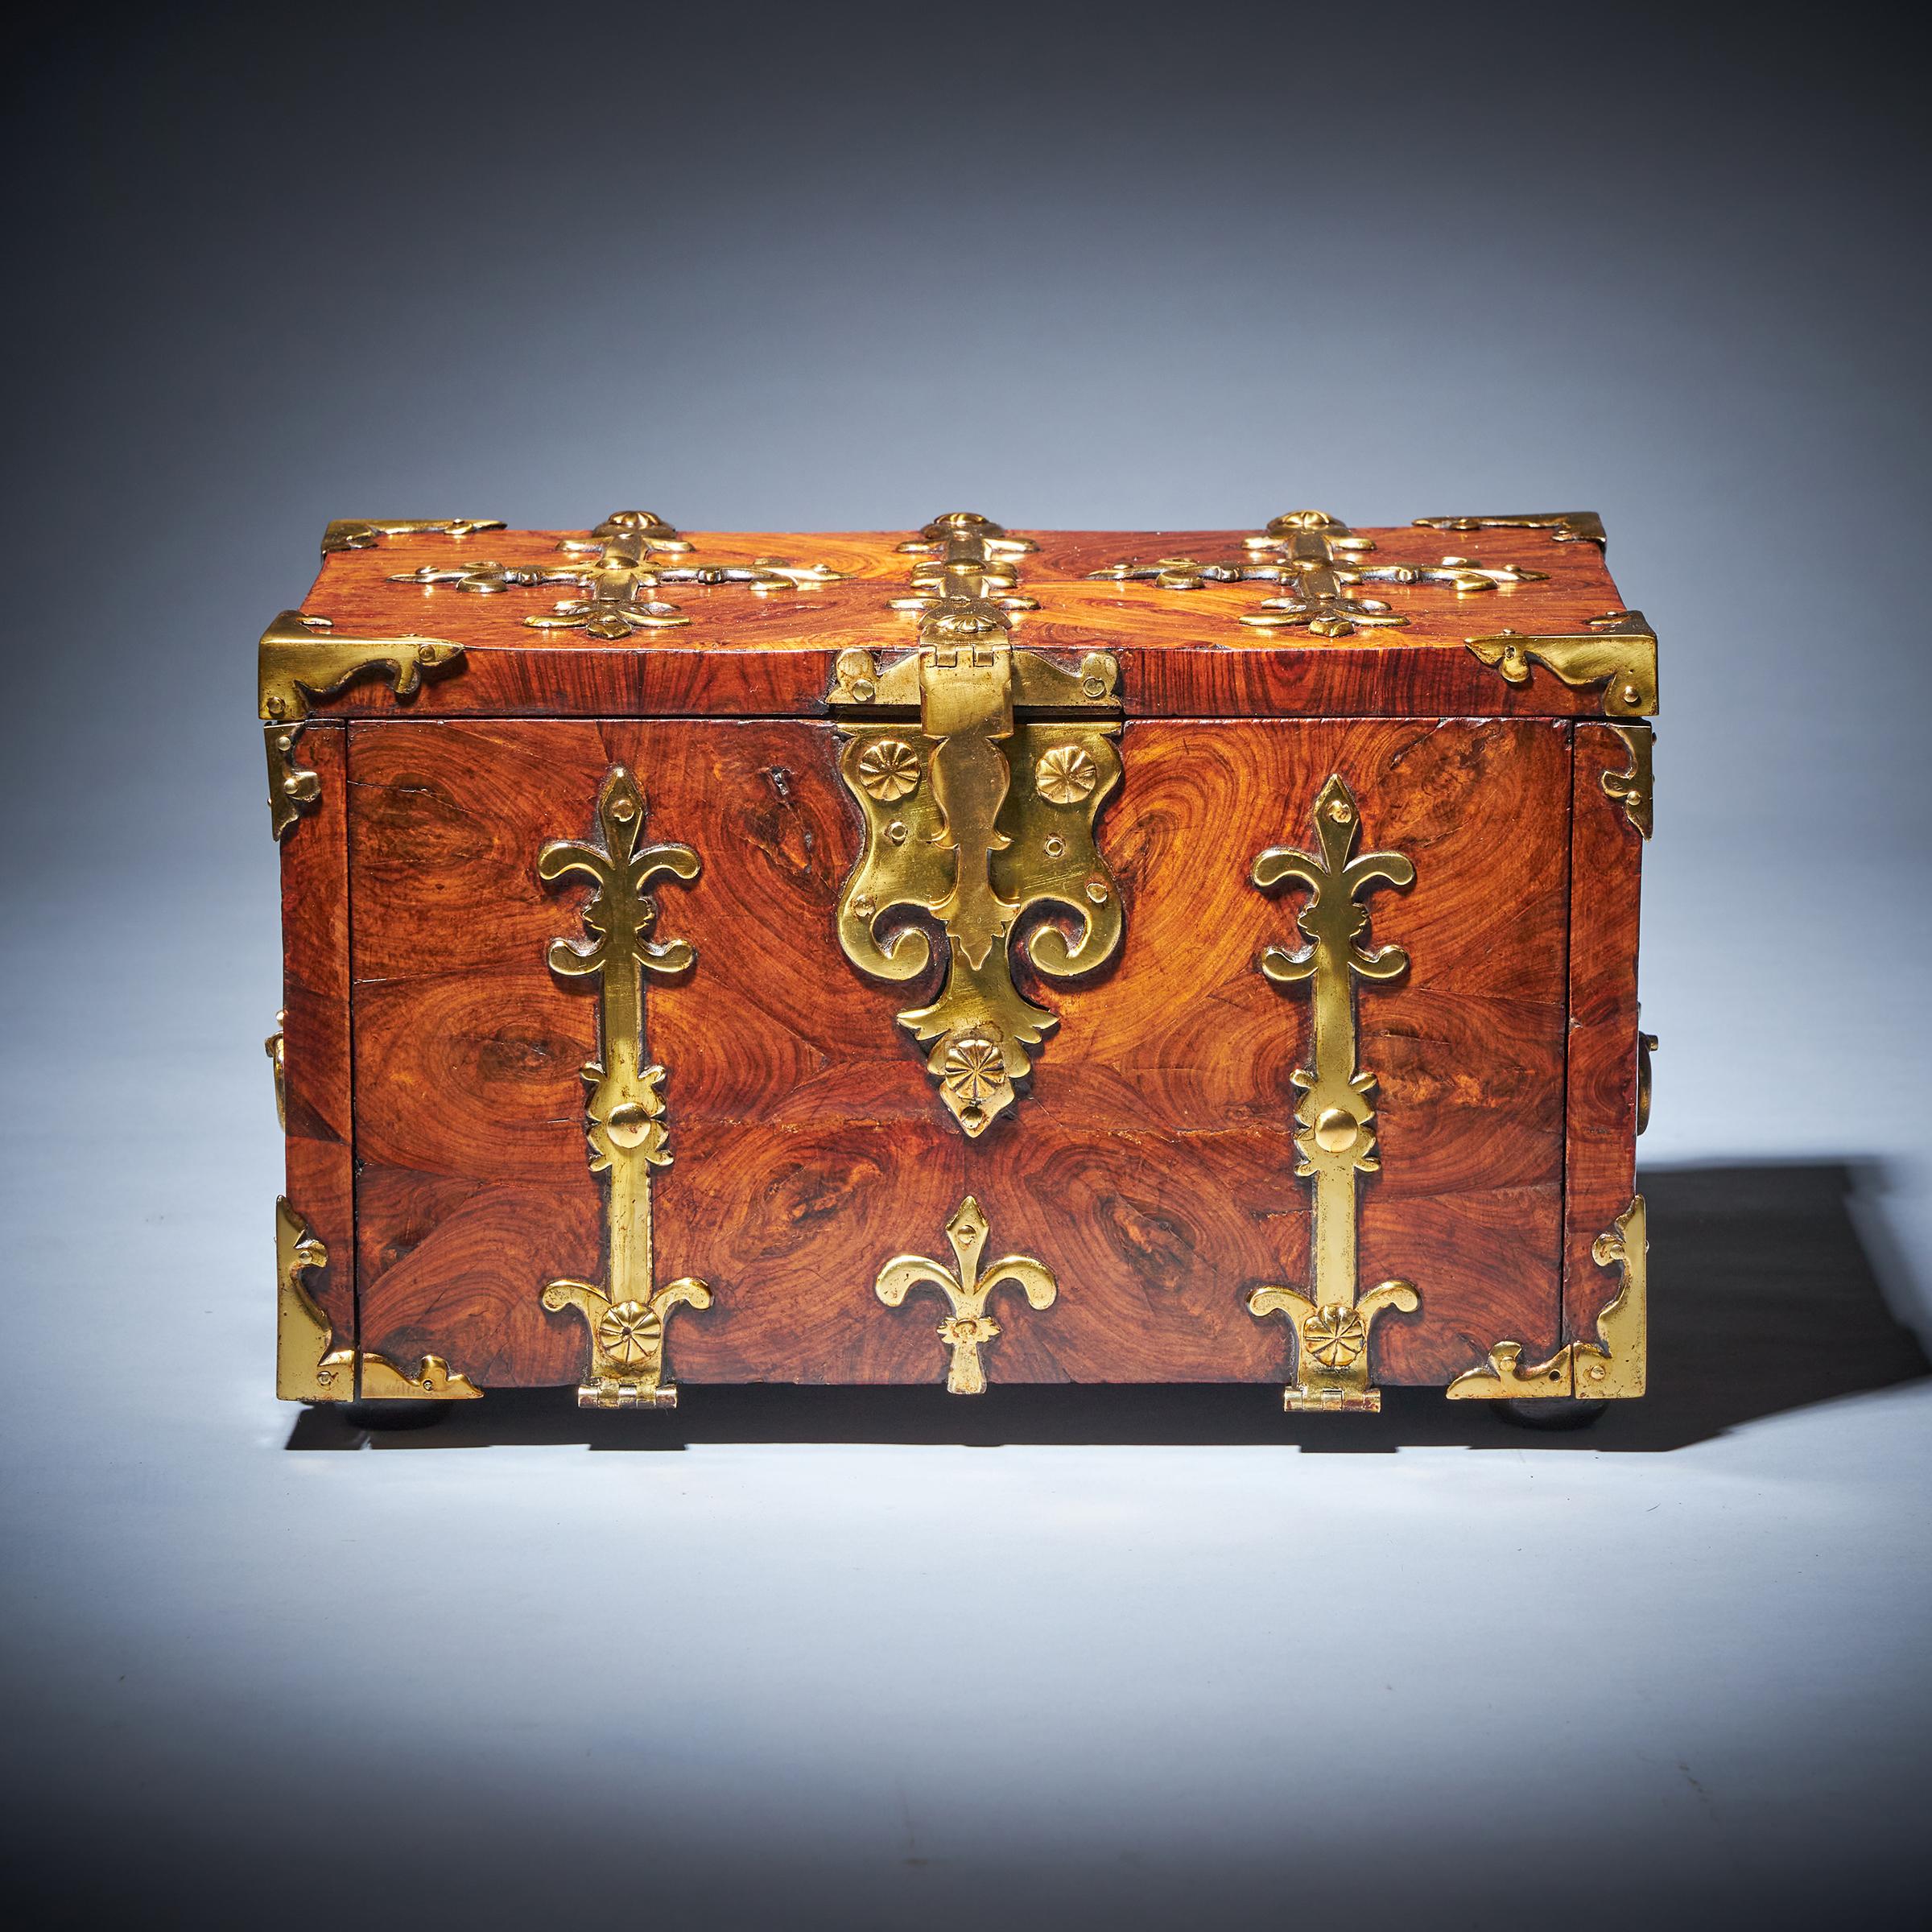 A superb William and Mary Kingwood / Princes Oyster strongbox or coffre fort of small proportions, circa 1680-1700, England. 

Adorned with highly decorative thick gilt brass strapwork and decorated entirely in knife cut oysters of kingwood, this